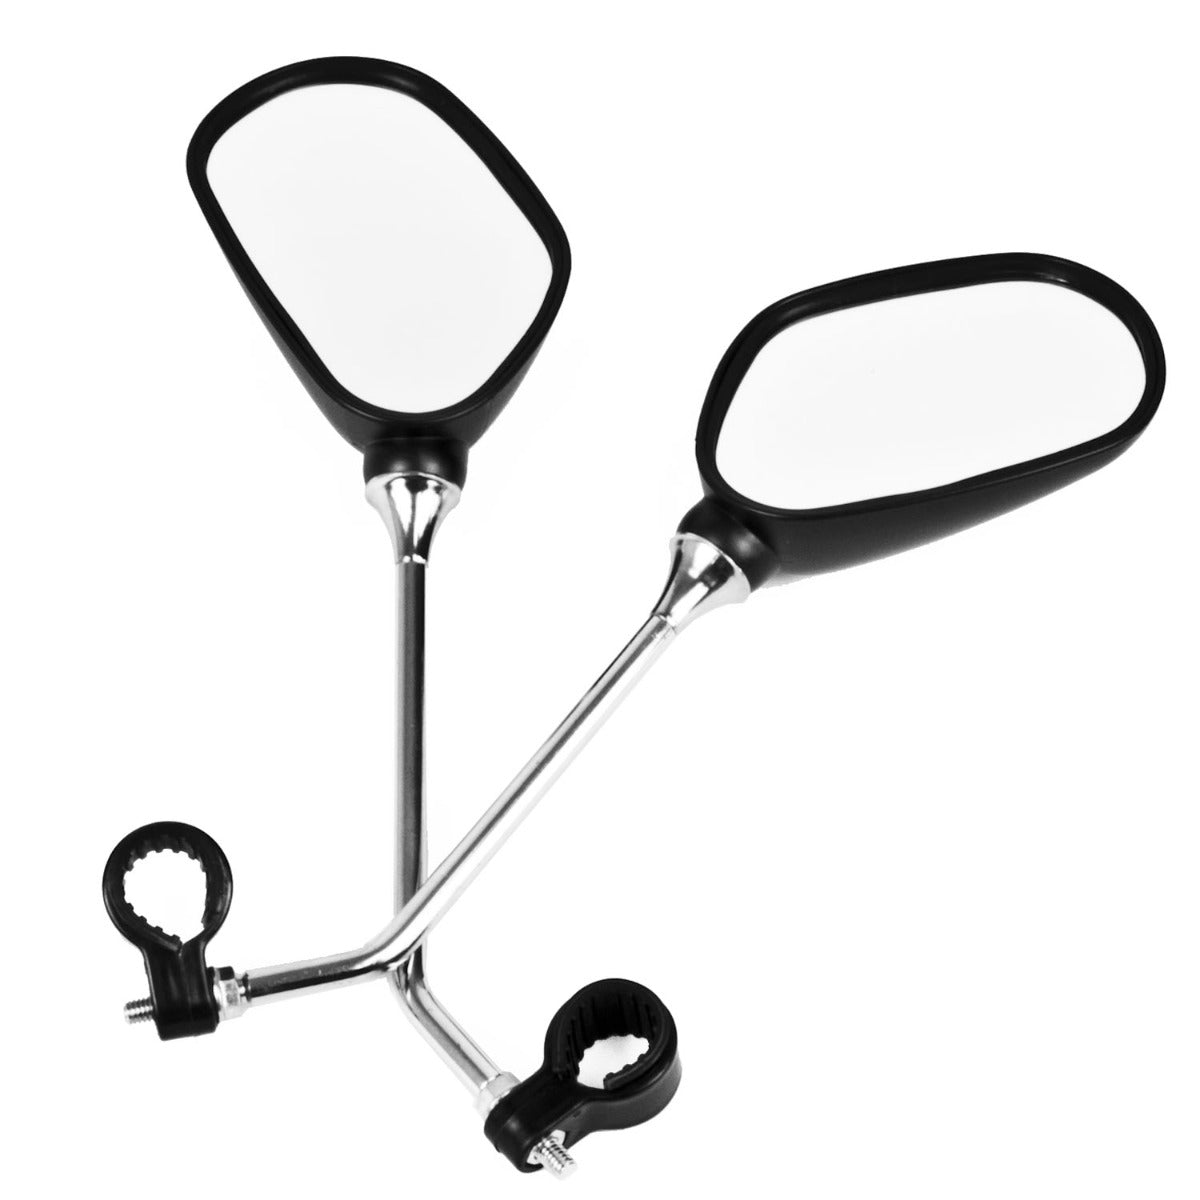 Pair of Oval Bike Mirrors with Reflectors